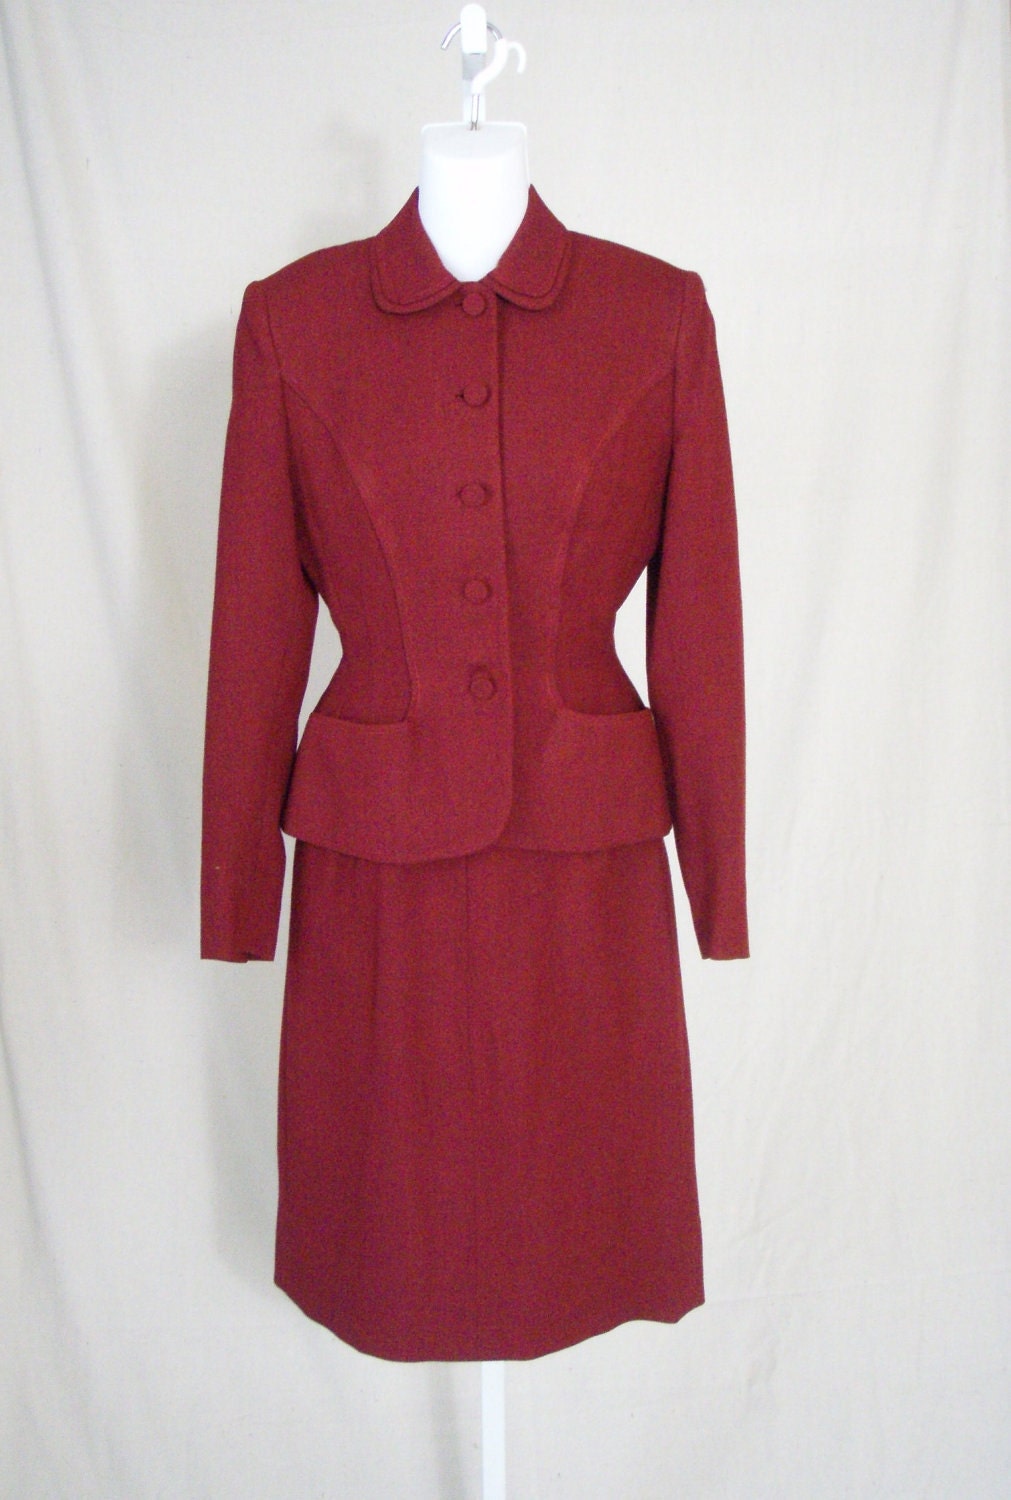 1940s Womens Vintage Scarlet Red Suit Jacket and Skirt XS New Look